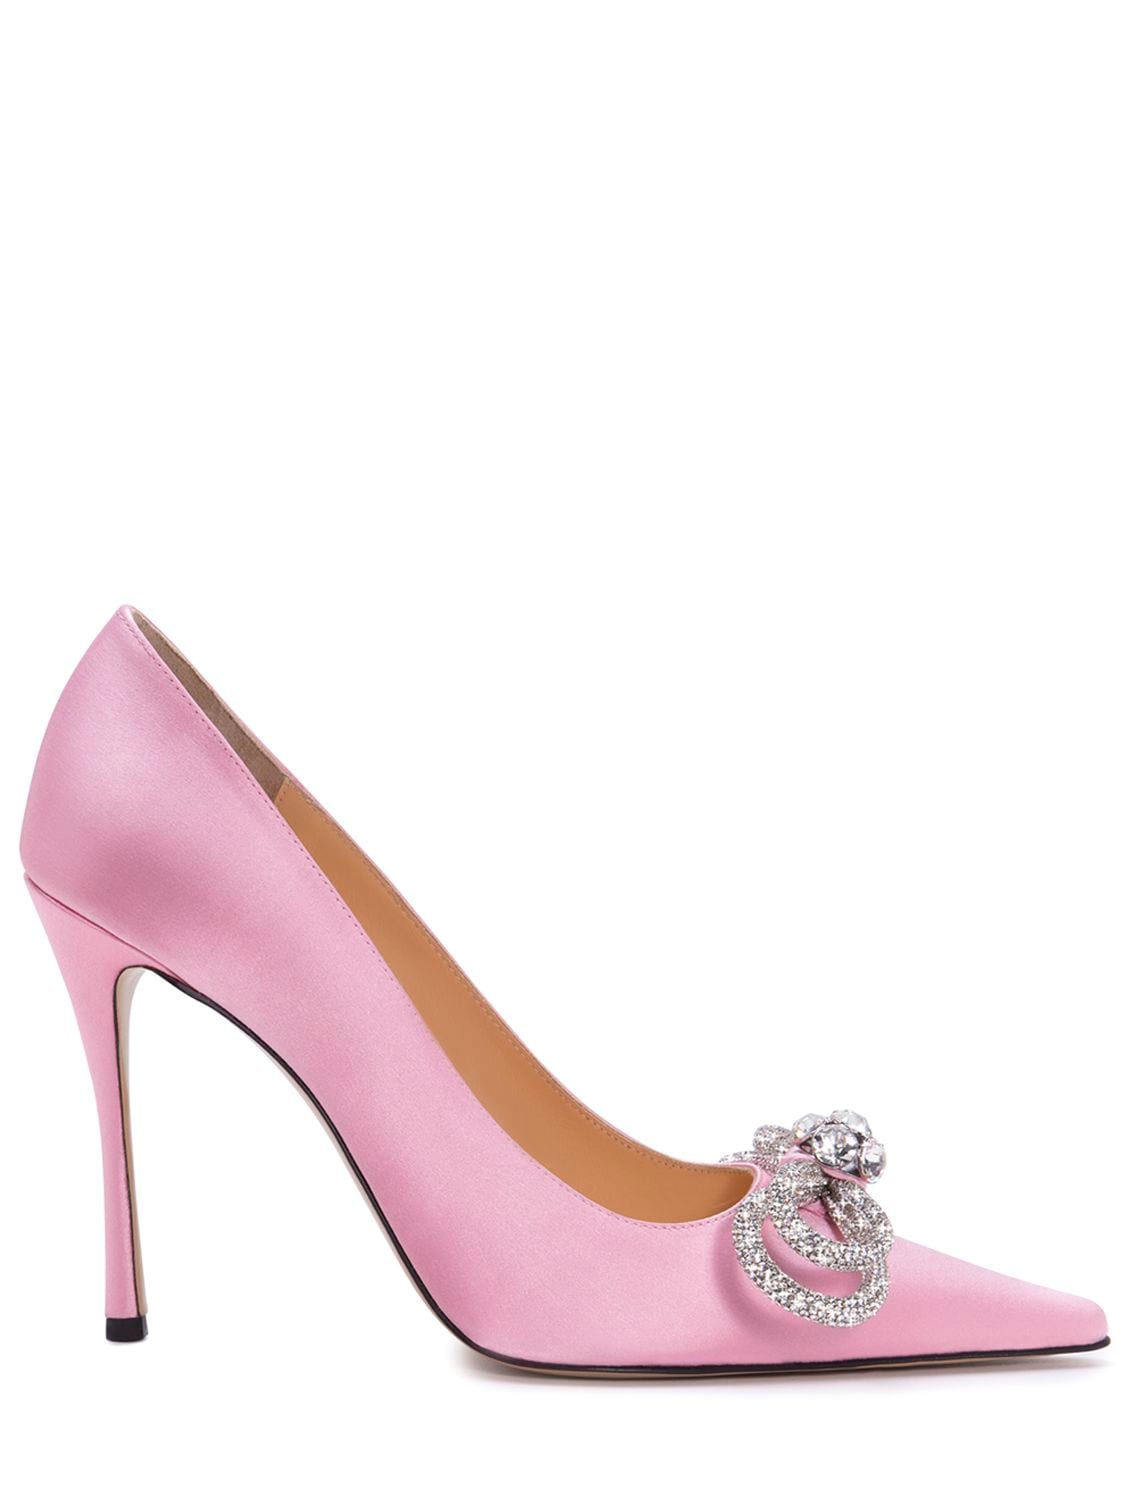 Image of 110mm Double Bow Satin Pumps